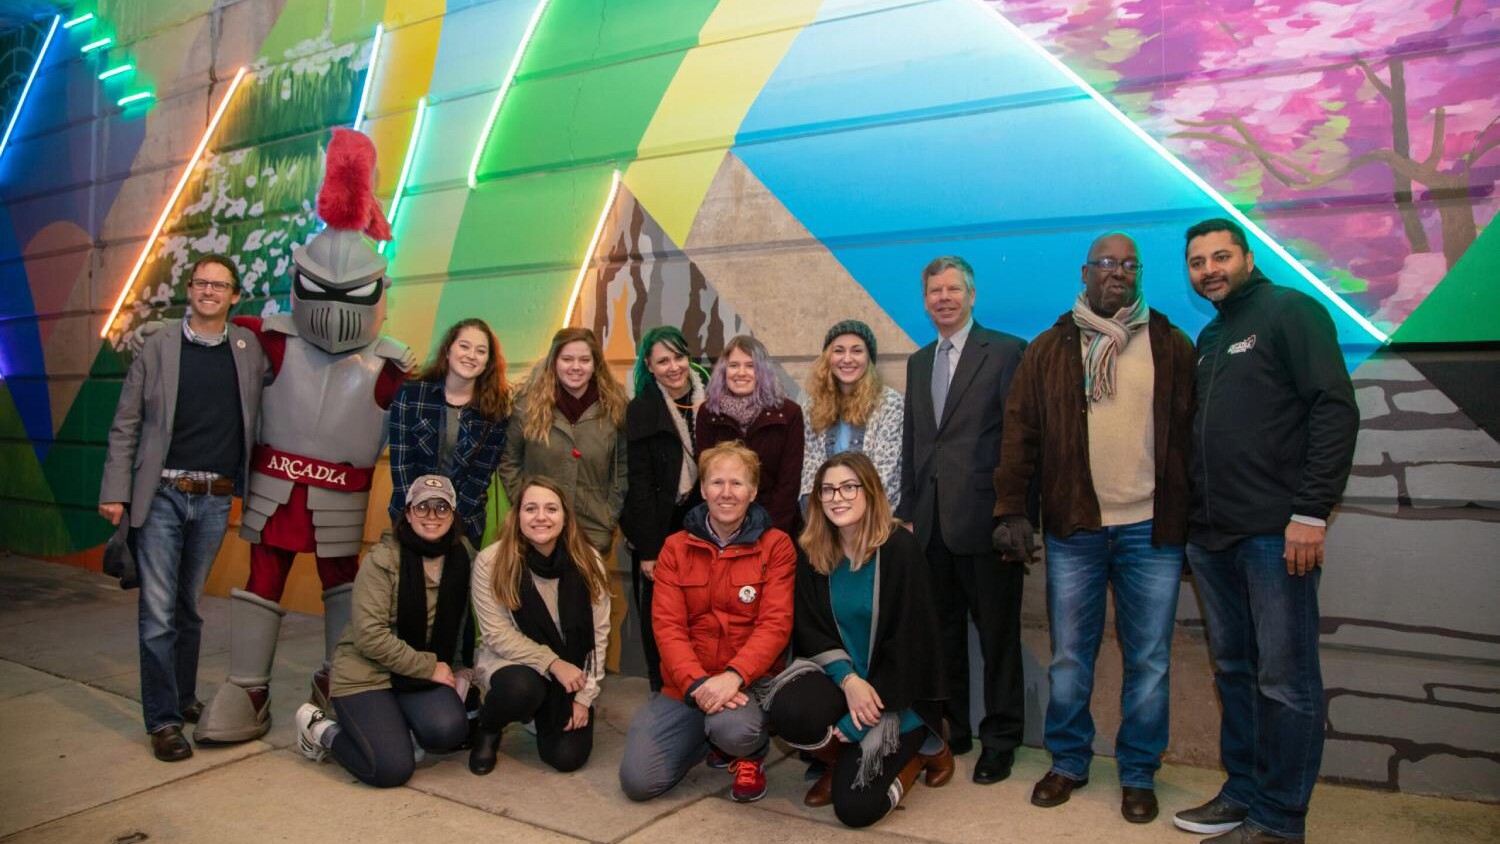 Students and faculty gather at a public art mural